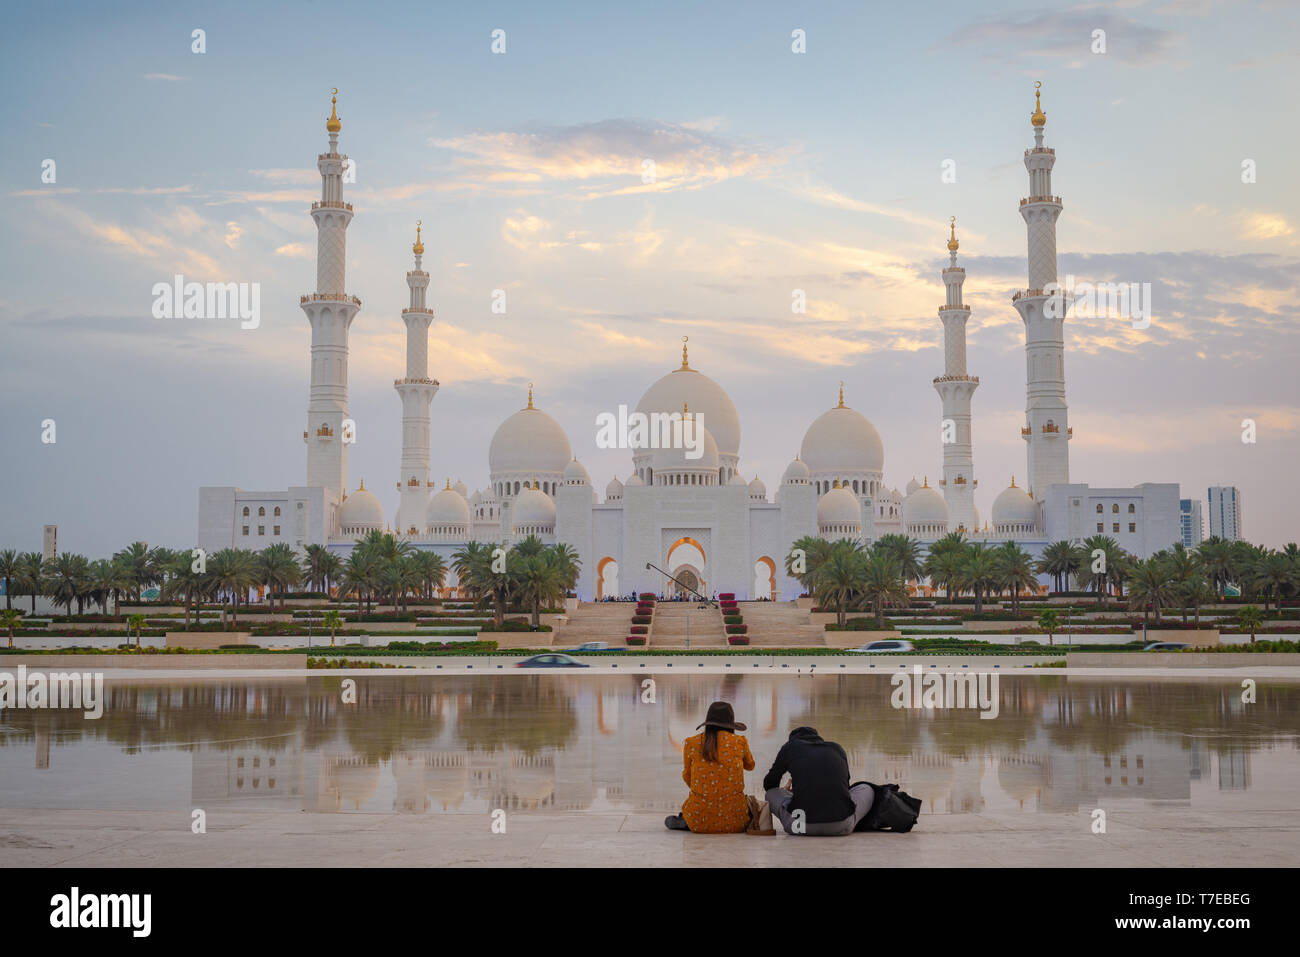 Axial view of the Great Mosque of Abu Dhabi at sunset with reflection over a water mirror with a couple seen from behind, United Arab Emirate Stock Photo